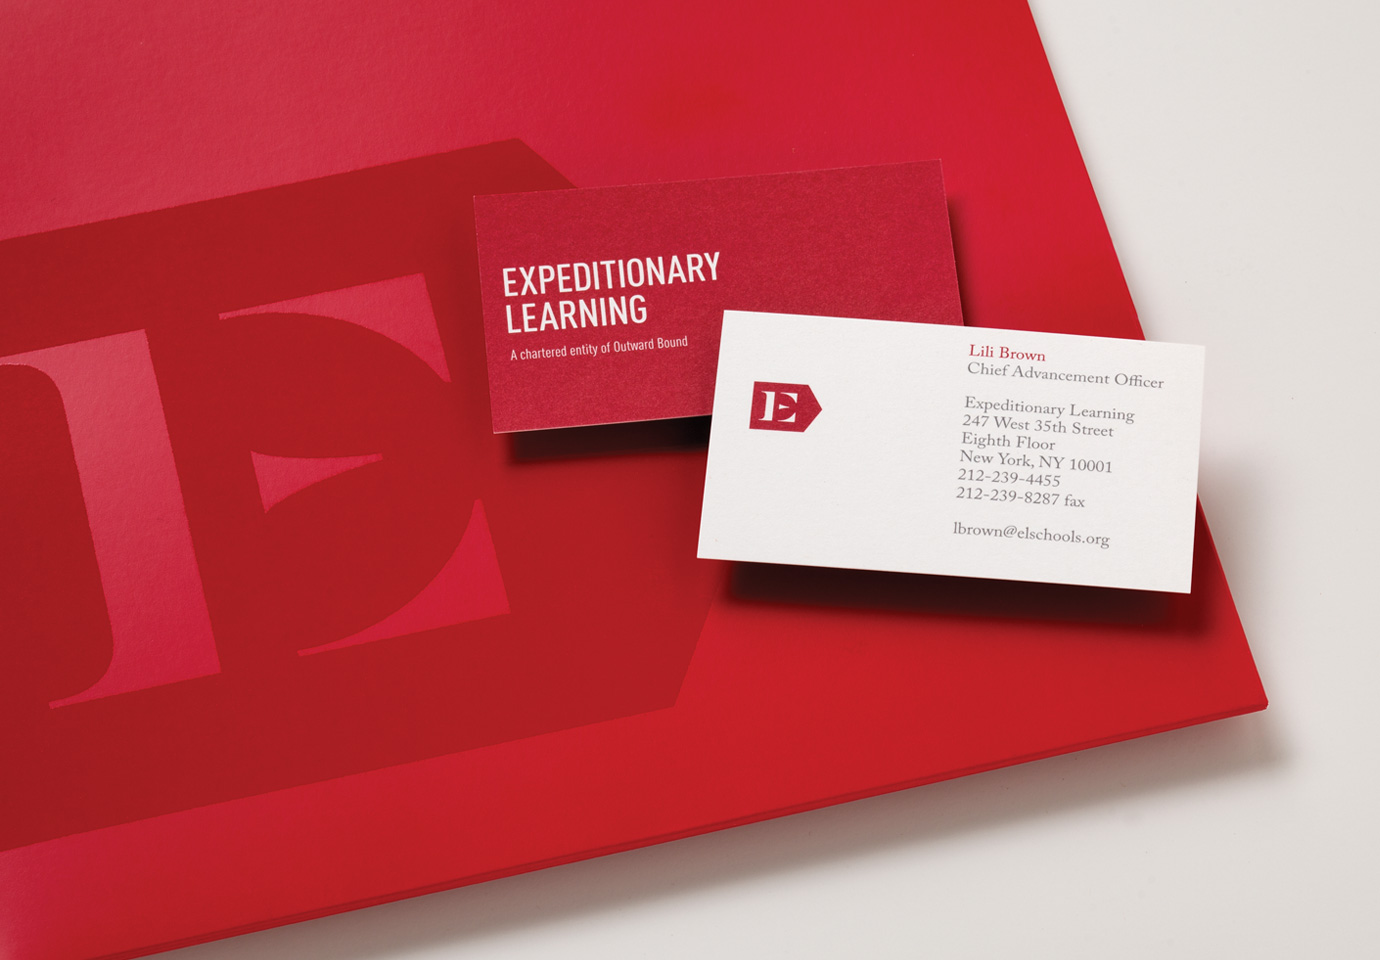 An crimson-branded Expeditionary Learning folder and business cards with the company logo.